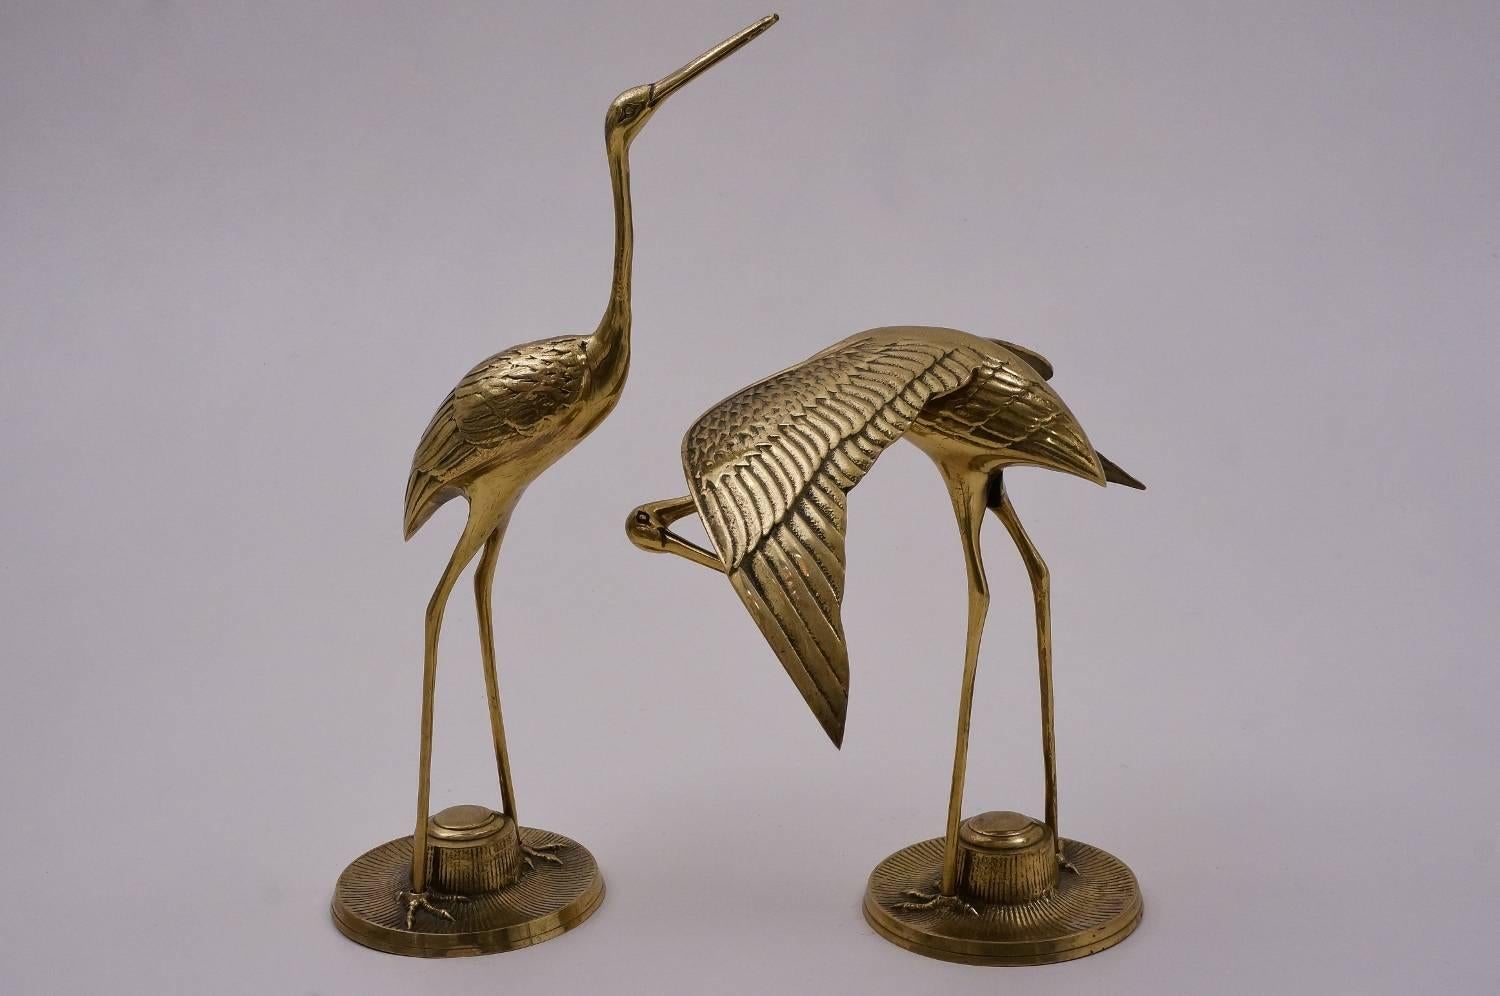 Pair of brass bird sculptures, herons, circa 1960s, French.

This pair of vintage sculptures have been gently cleaned while respecting the aged patina. 

Perfect to finish a Hollywood Regency interior this pair of solid brass herons are